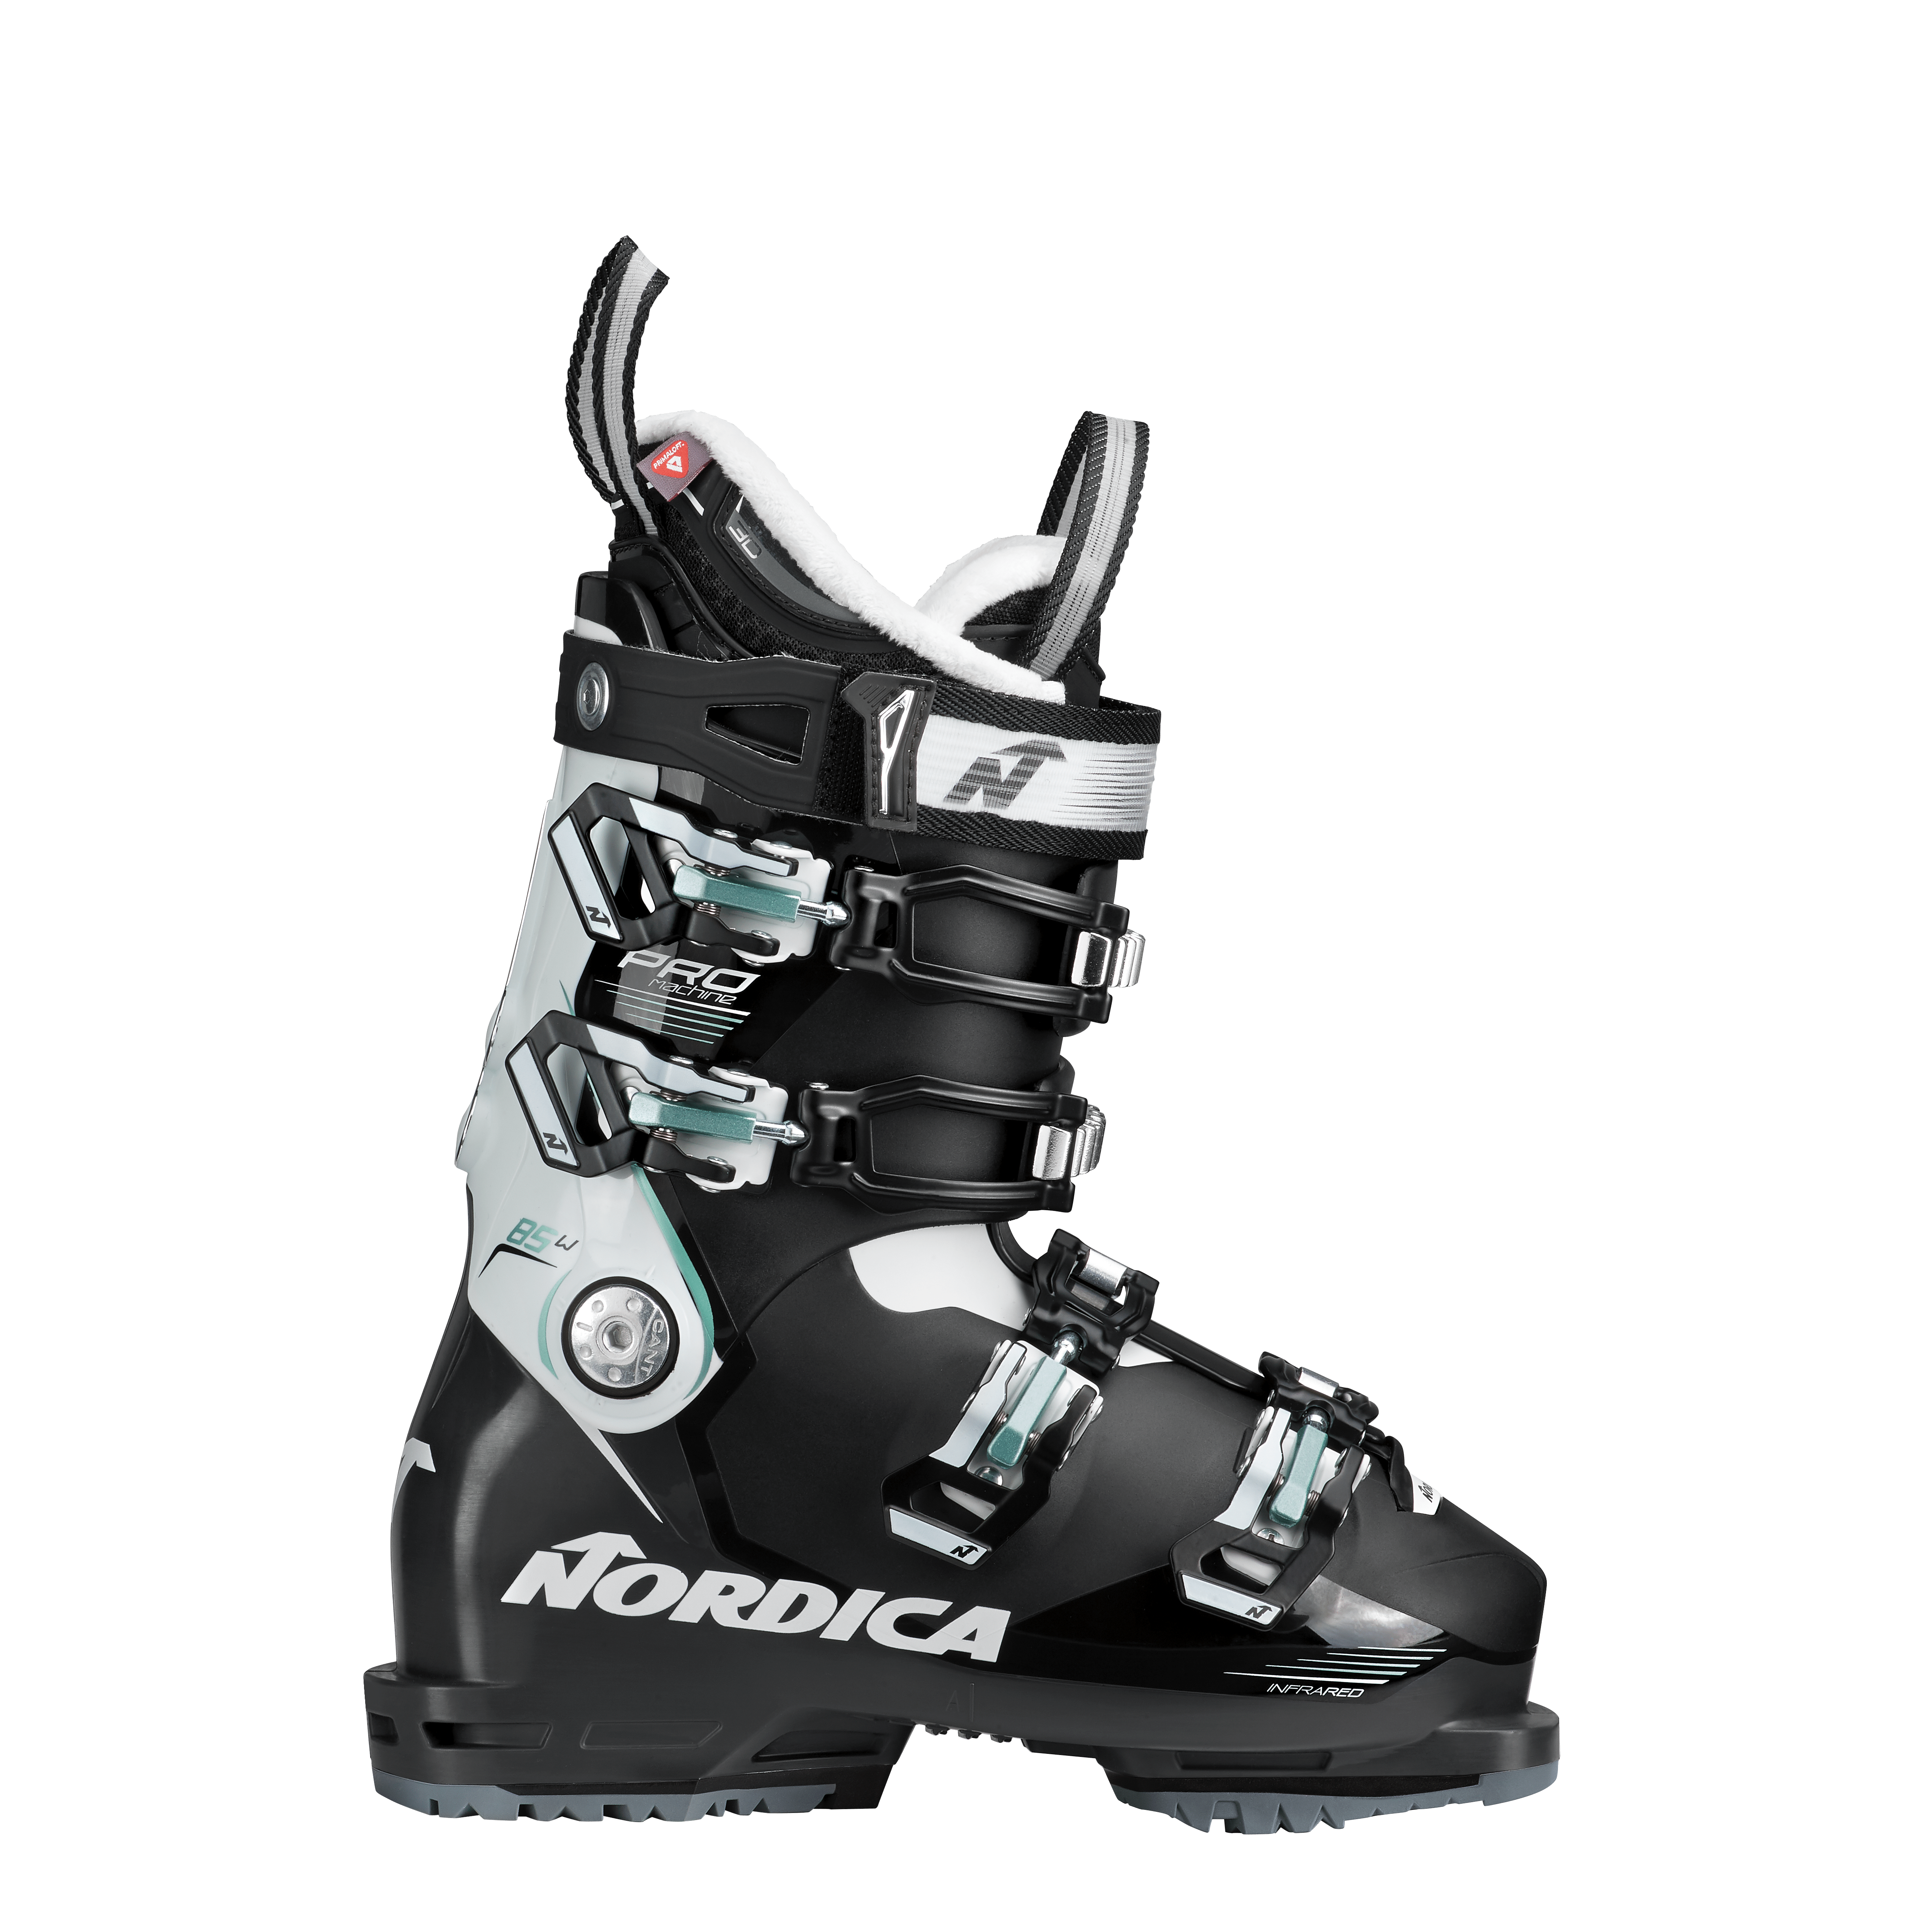 BOOTS Nordica - Skis and Boots website